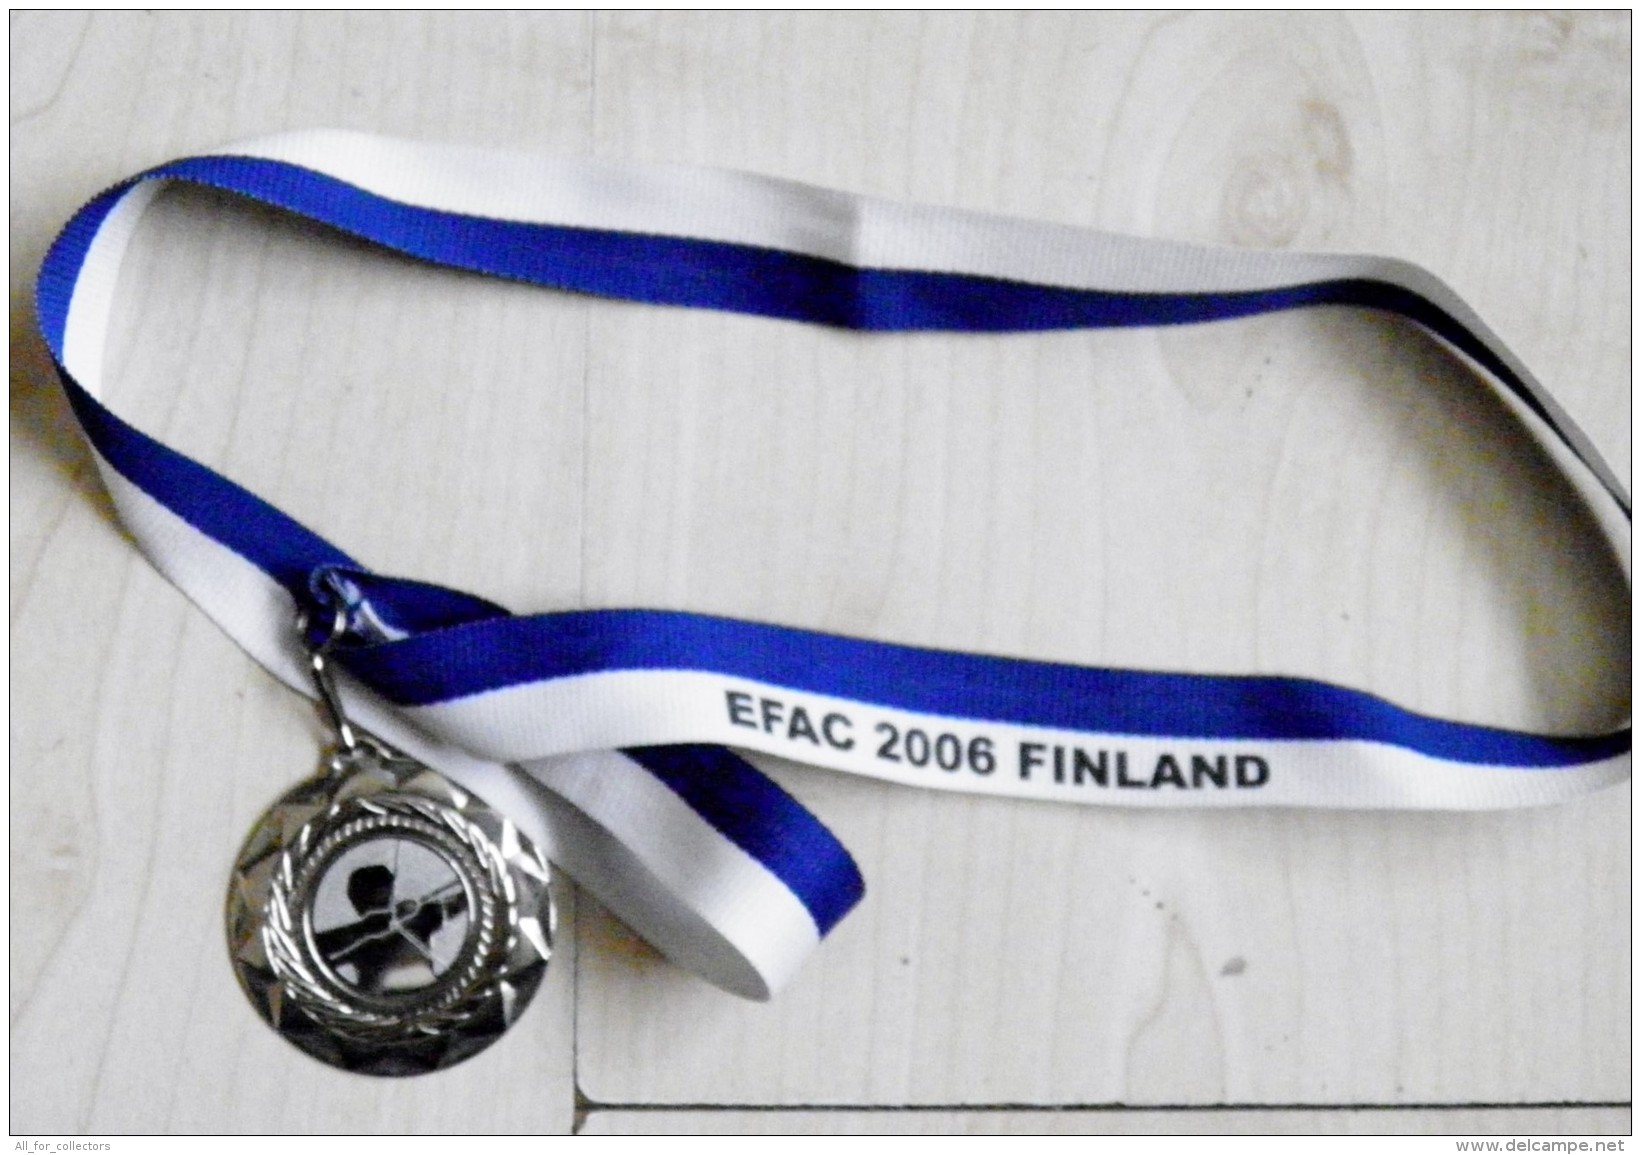 Archery Shooting Sport Medal From Finland Efac 2006 - Tiro Con L'Arco